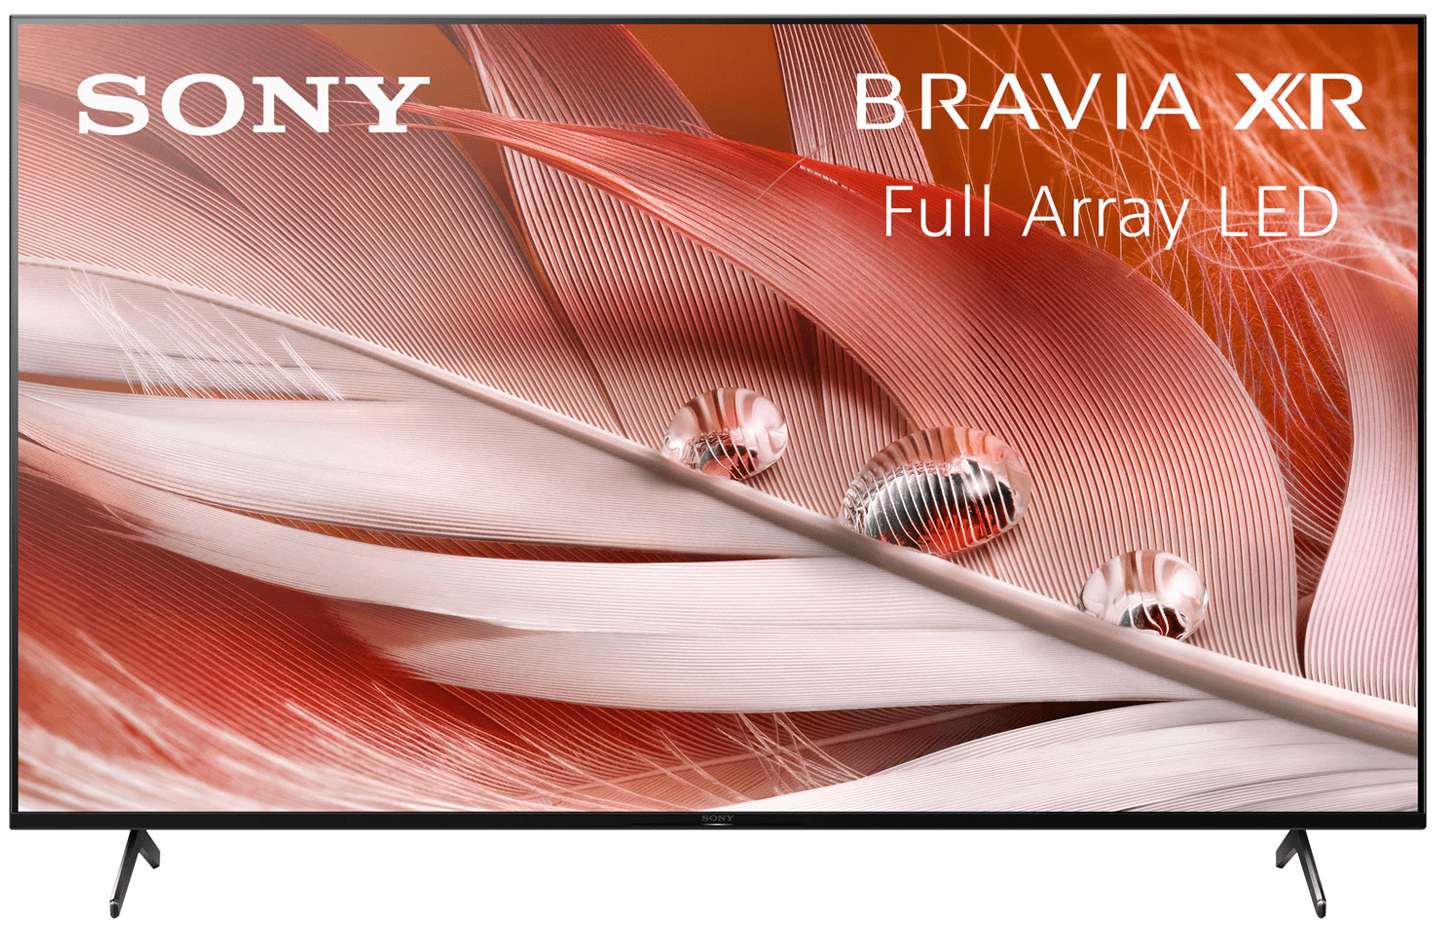 Sony X90J 55 inch BRAVIA XR Full Array LED 4K Ultra HD HDR Smart Google TV with Dolby Vision & Atmos (XR55X90J)